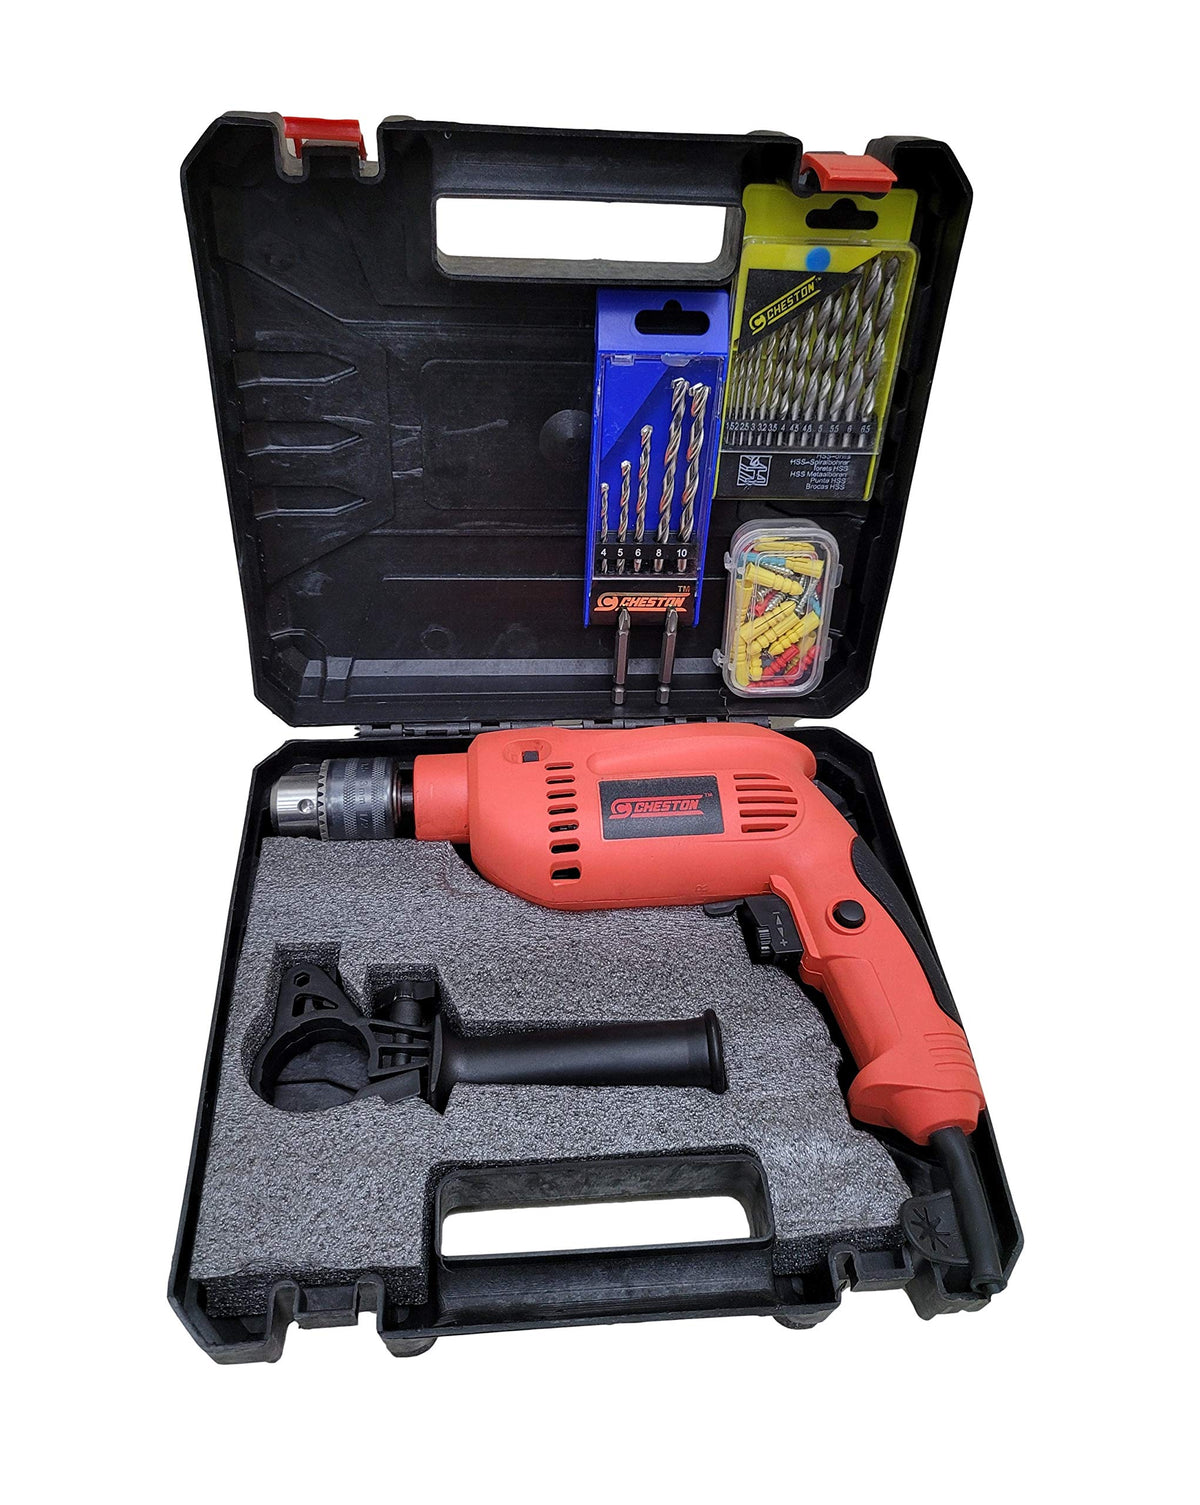 Cheston 13mm Impact Drill Machine Reversible Hammer Driver Variable Speed Screwdriver with 80 Accessories in Tool Box Case